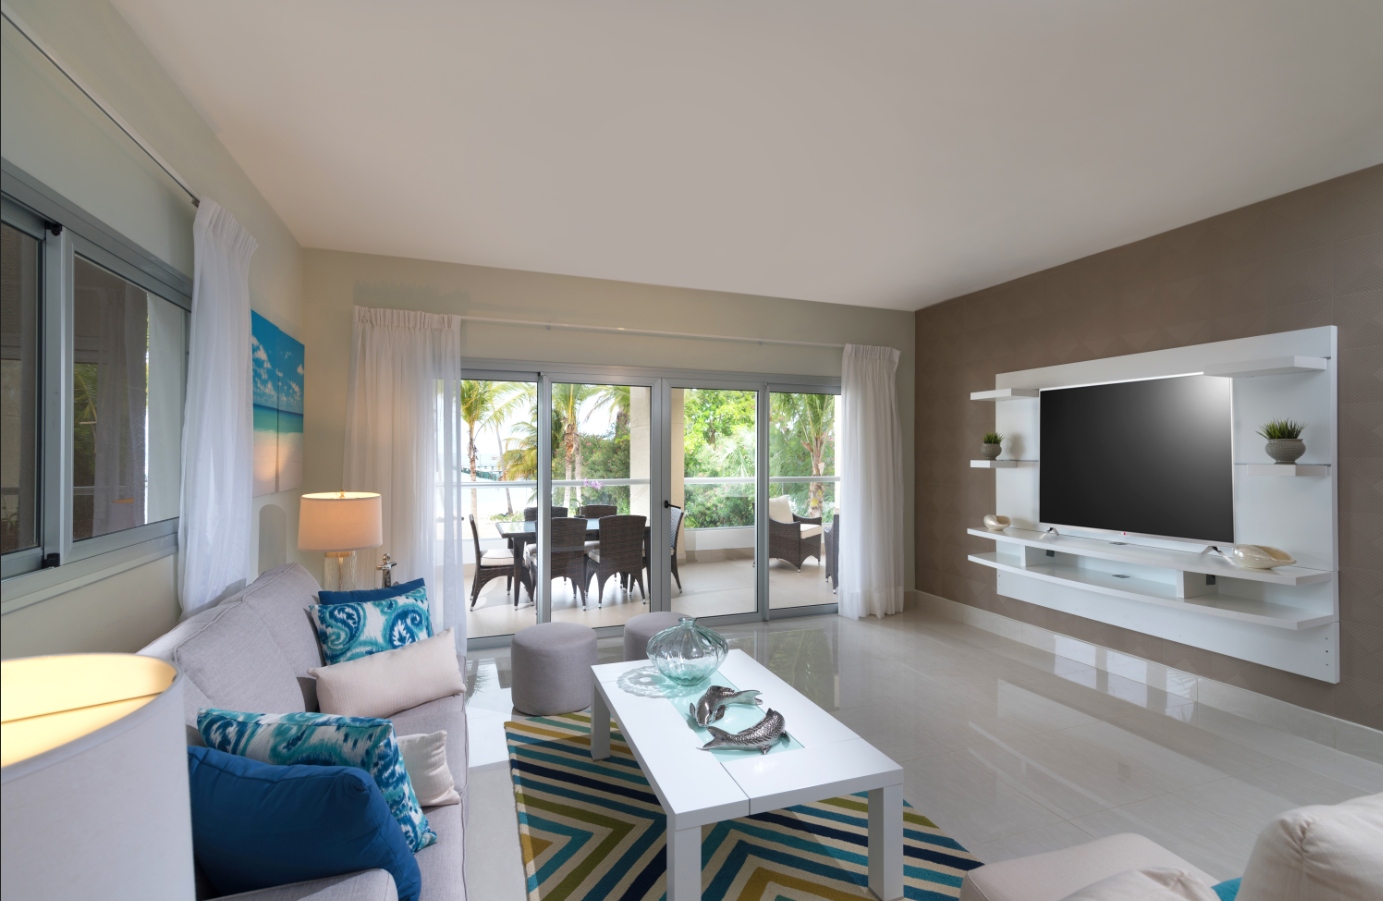 BlueBay Hotels strengthens its presence in the Caribbean with  BlueBay Grand Punta Cana